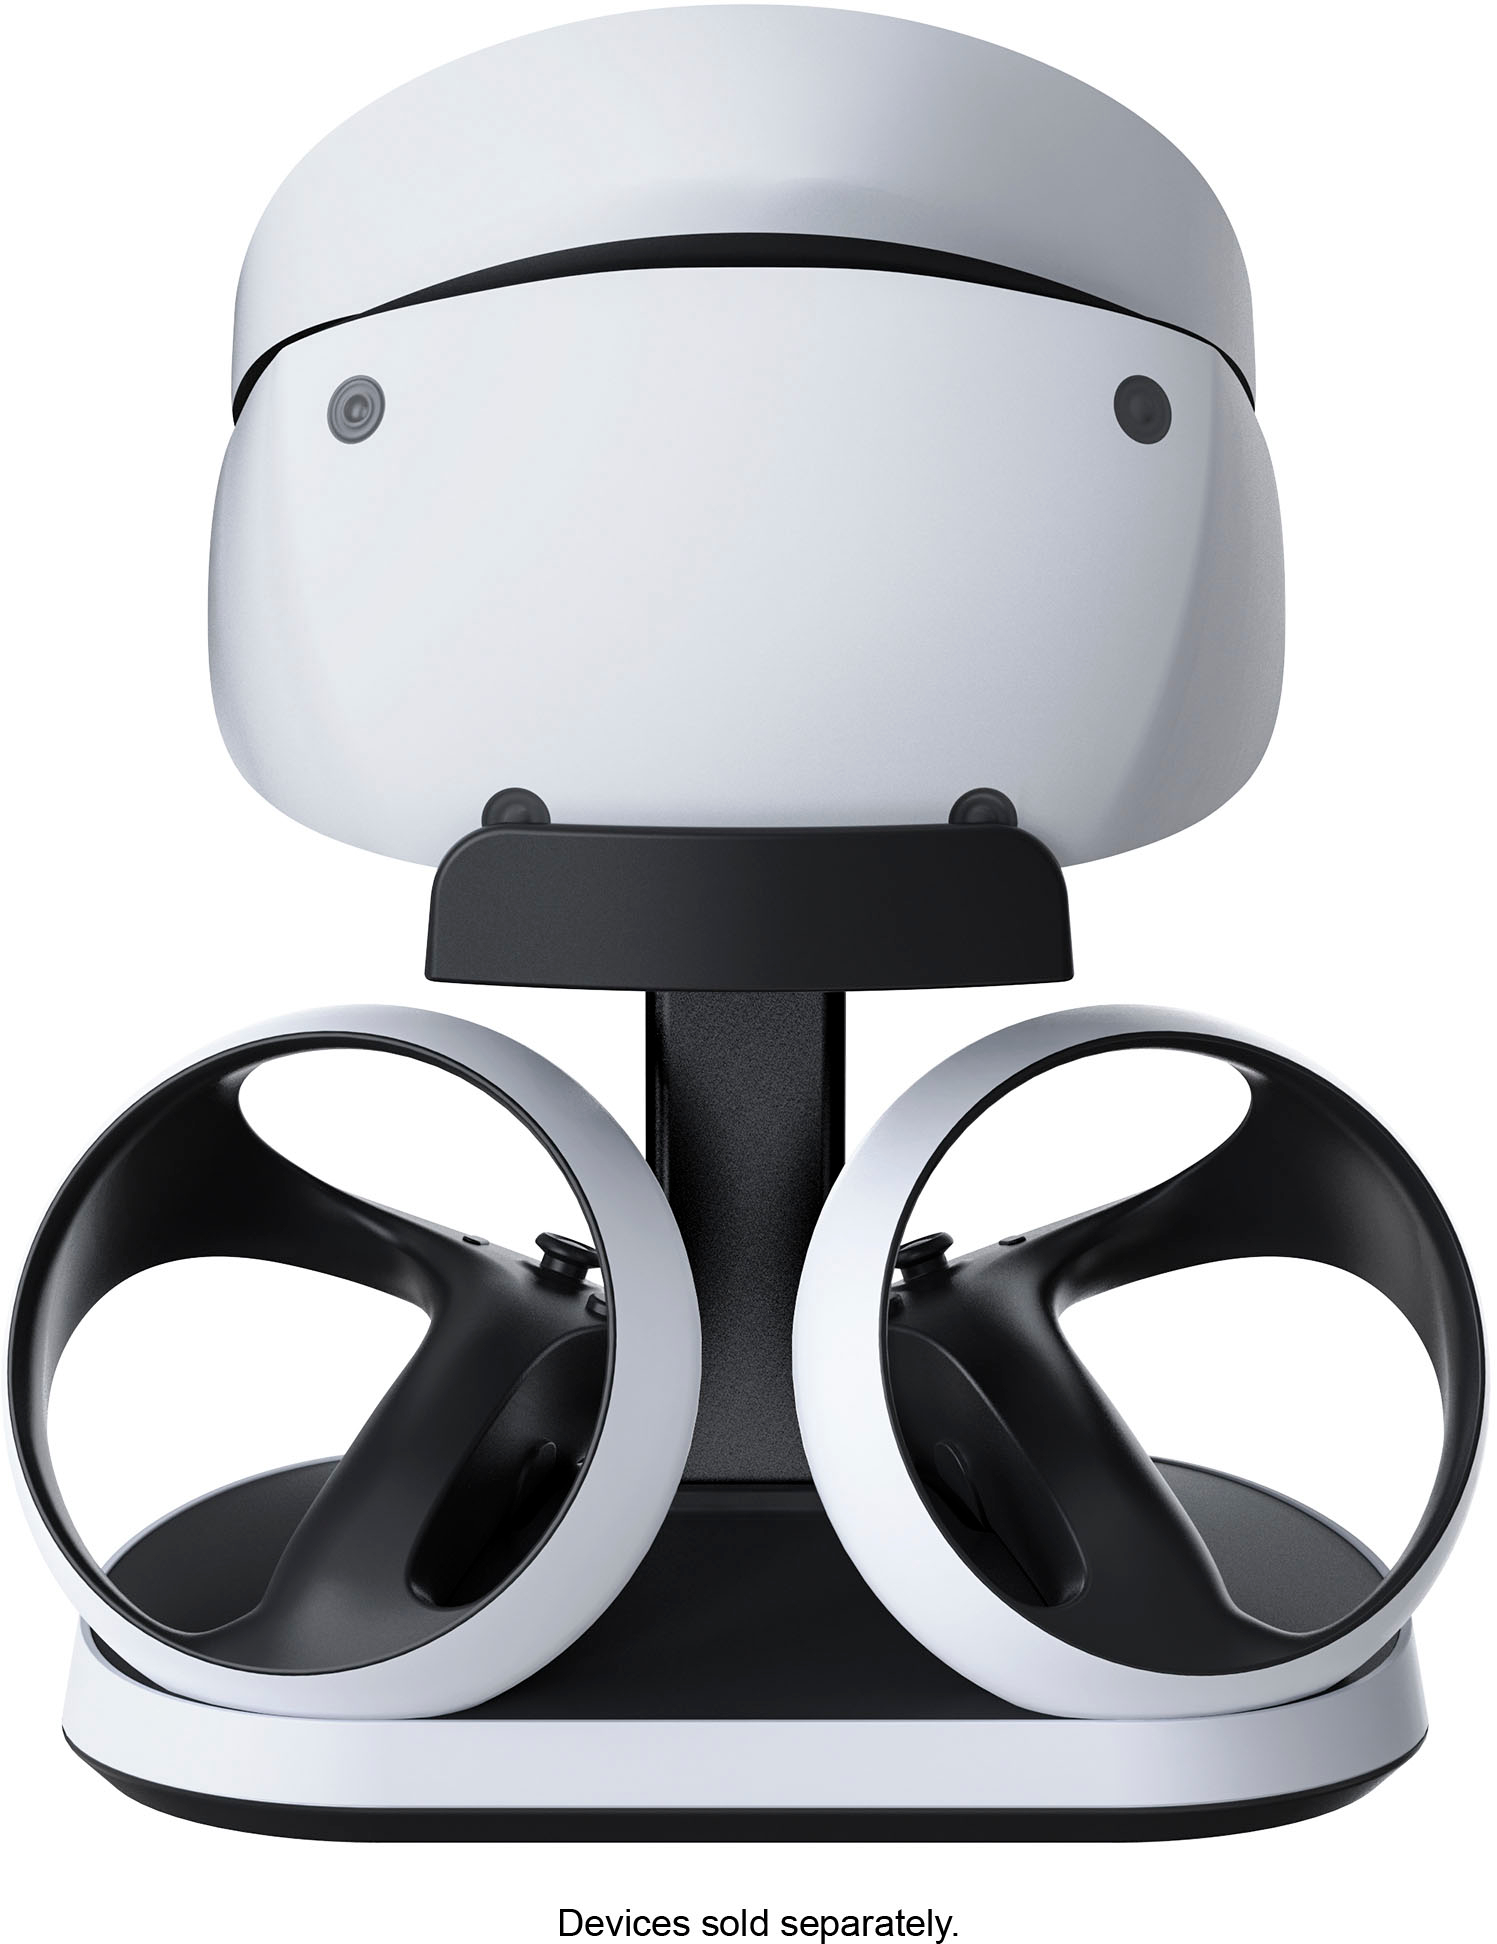 Insignia™ Stand for Sony PlayStation VR2 Headset and Sense 